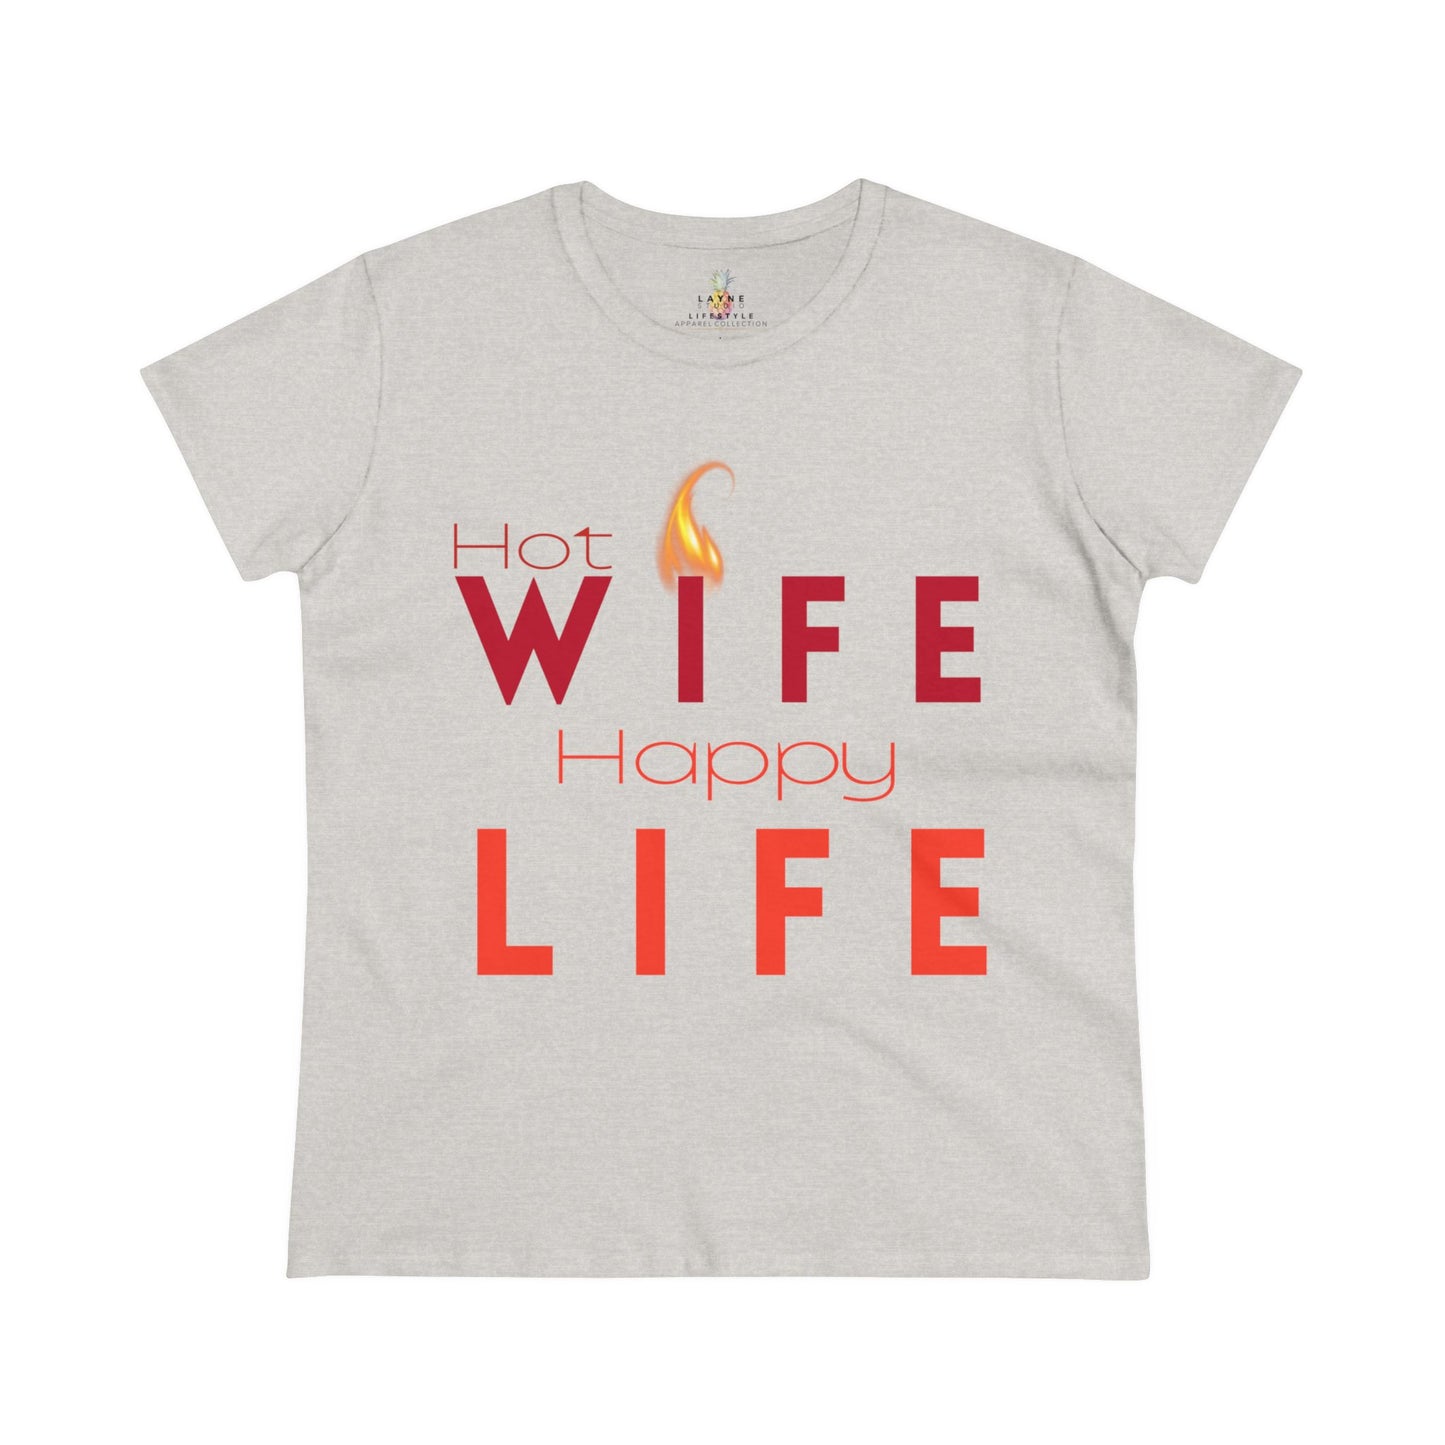 "Hot Wife, Happy Life" Graphic Women's Midweight Cotton Tee